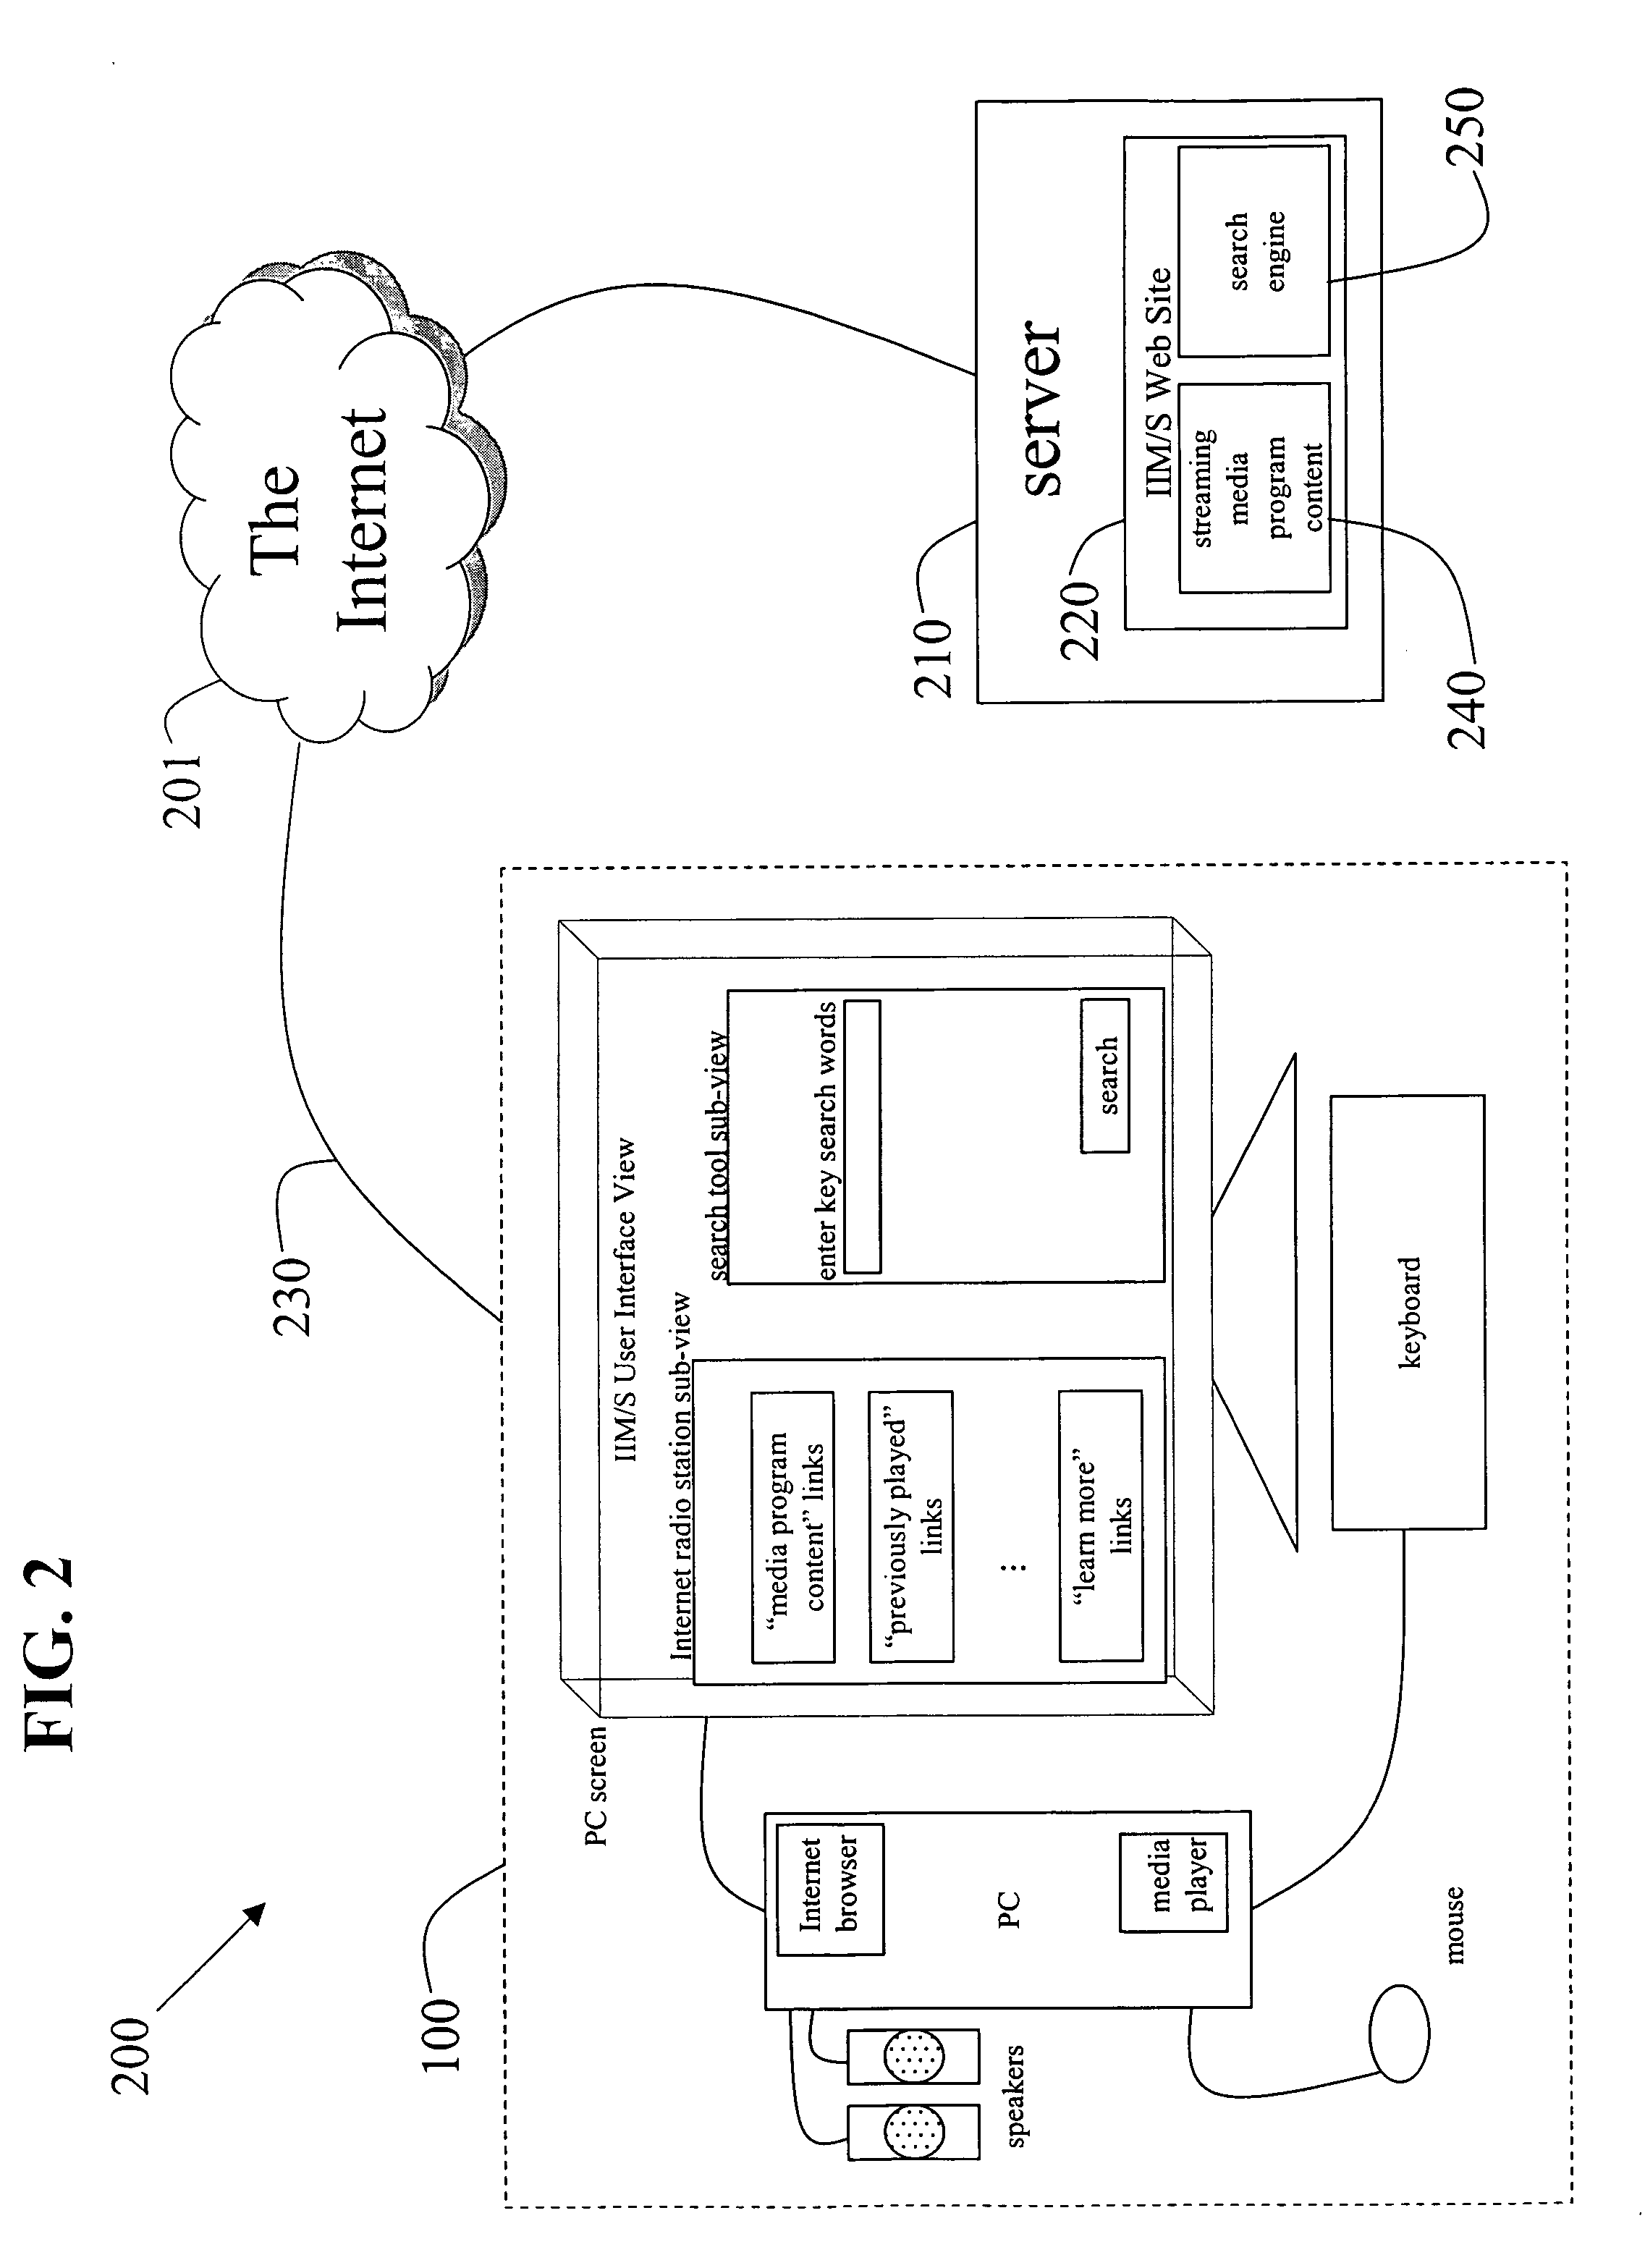 Methods to adapt search results provided by an integrated network-based media station/search engine based on user lifestyle